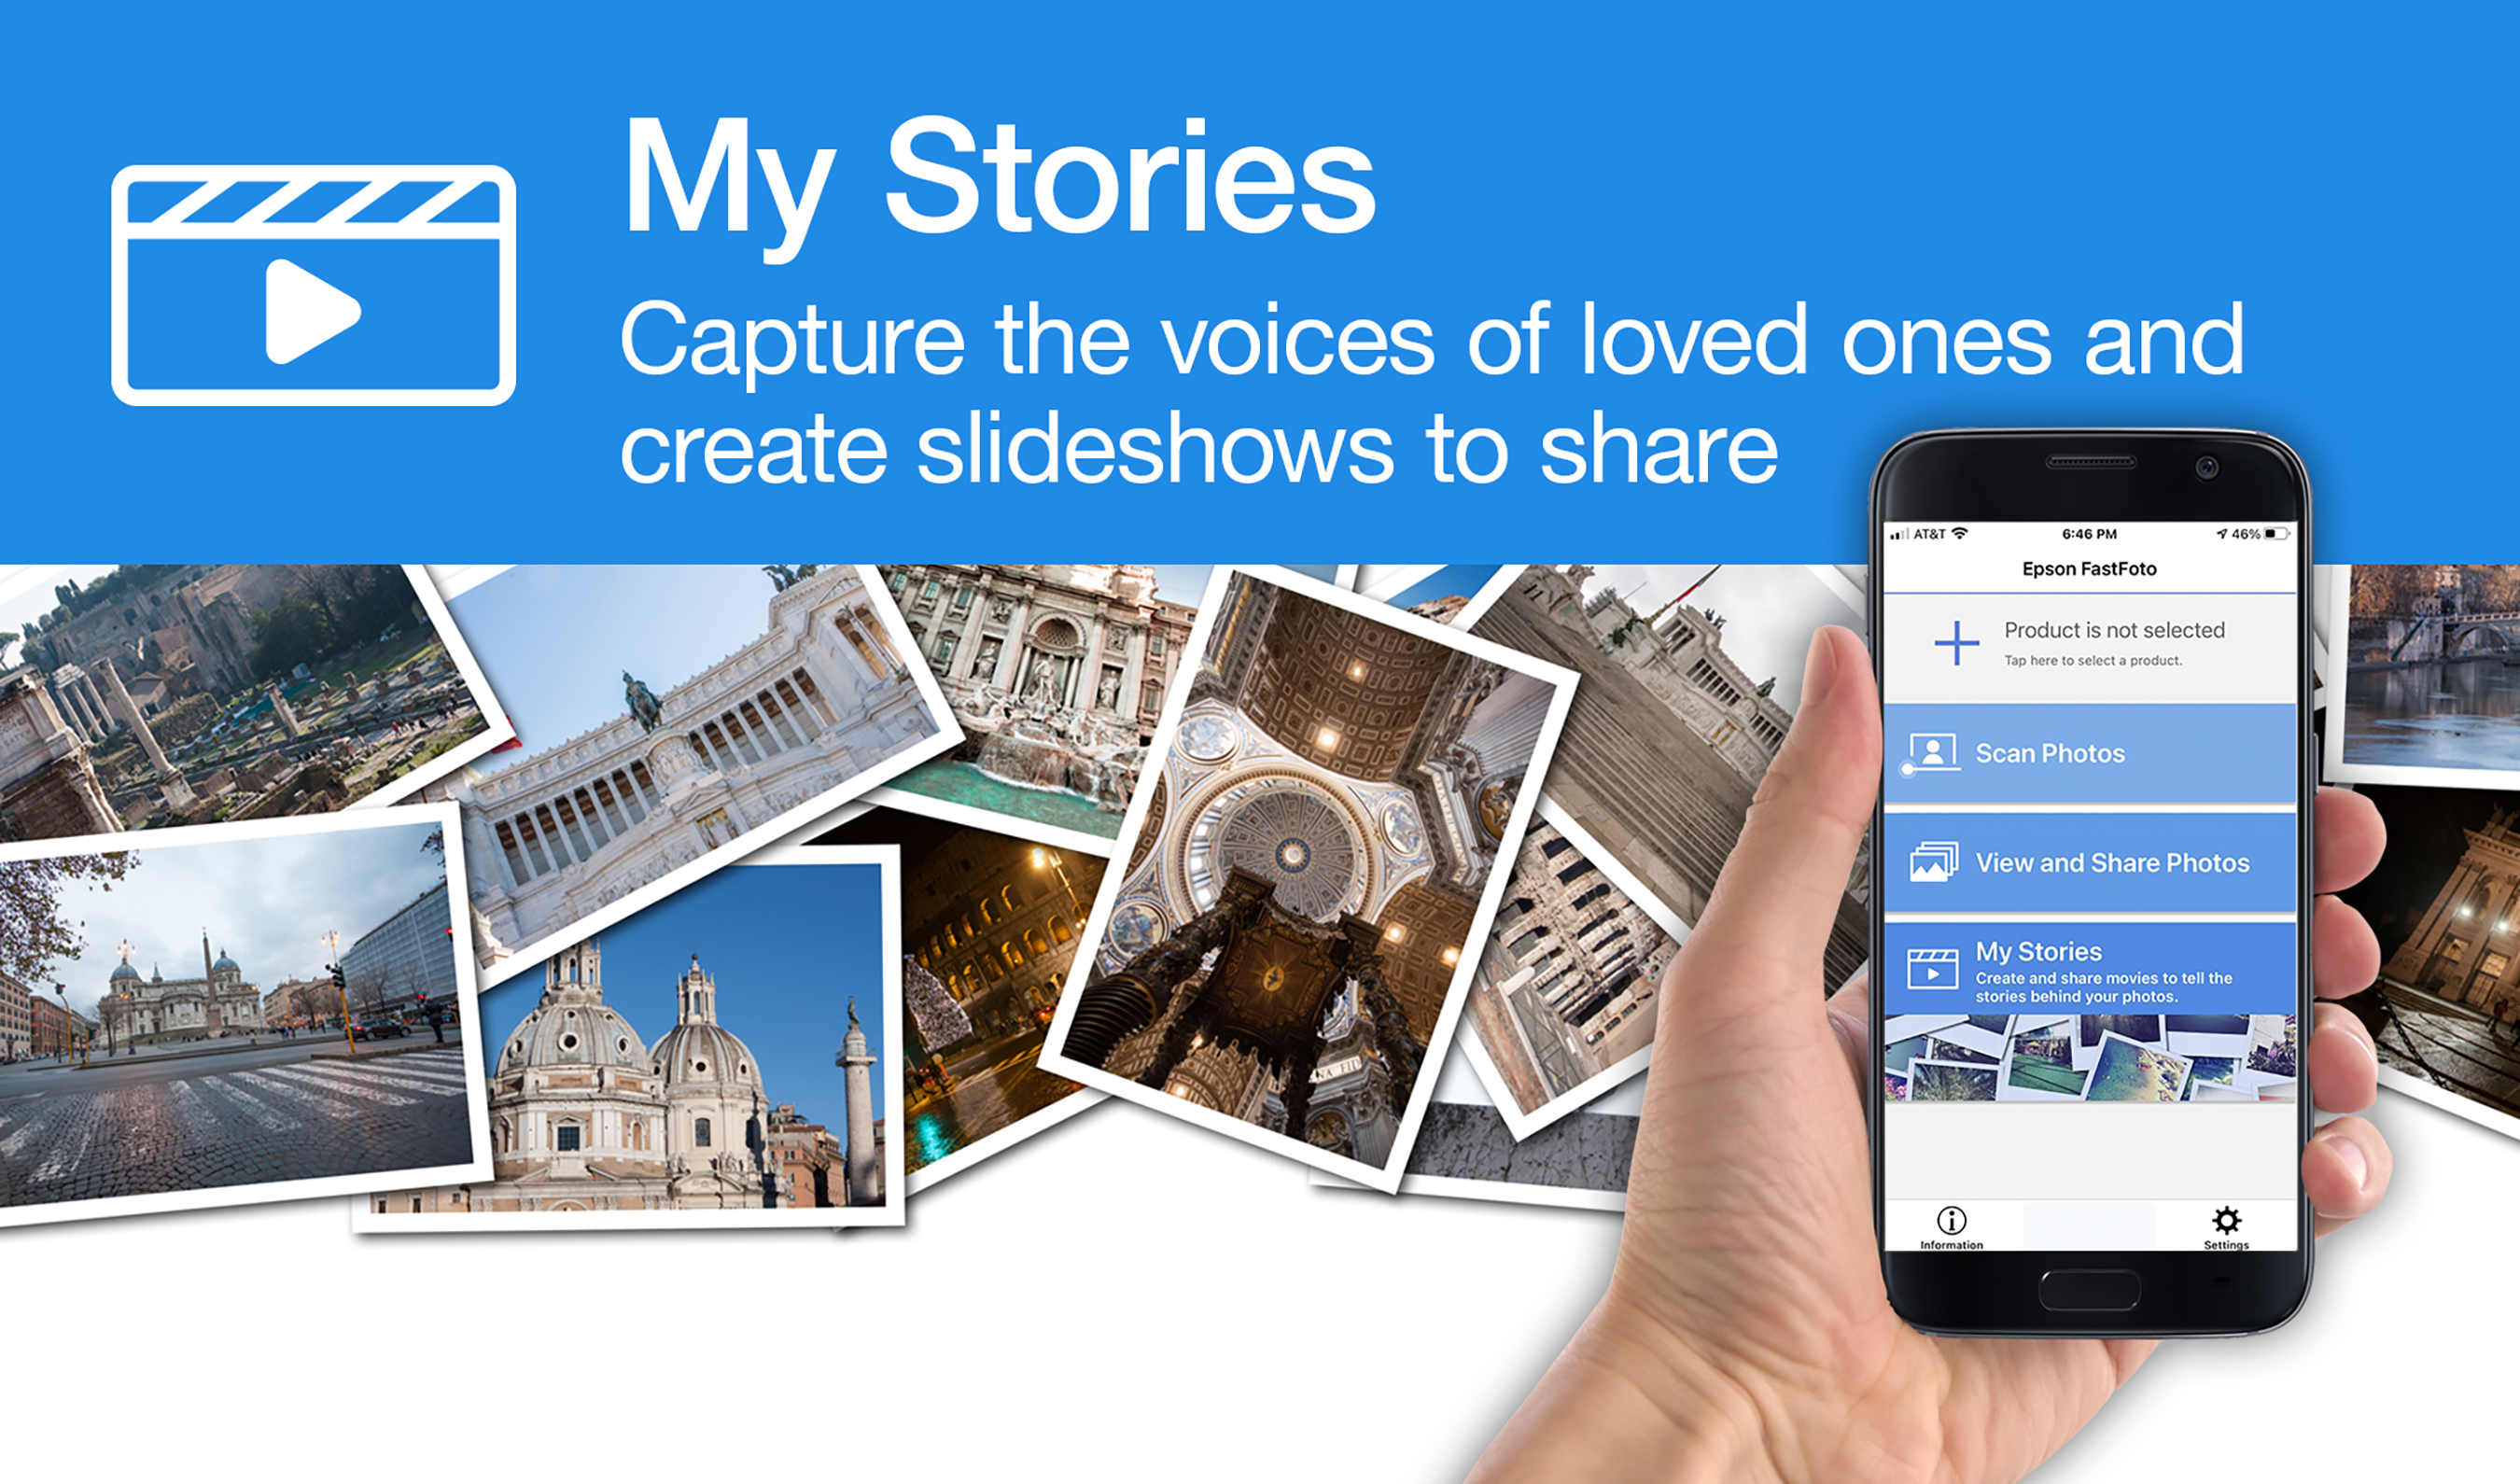 Together with the Epson FastFoto app,2 capture the voice of loved ones and create custom videos from an iOS® or Android™ smartphone or device, and relive treasured moments for generations to come.